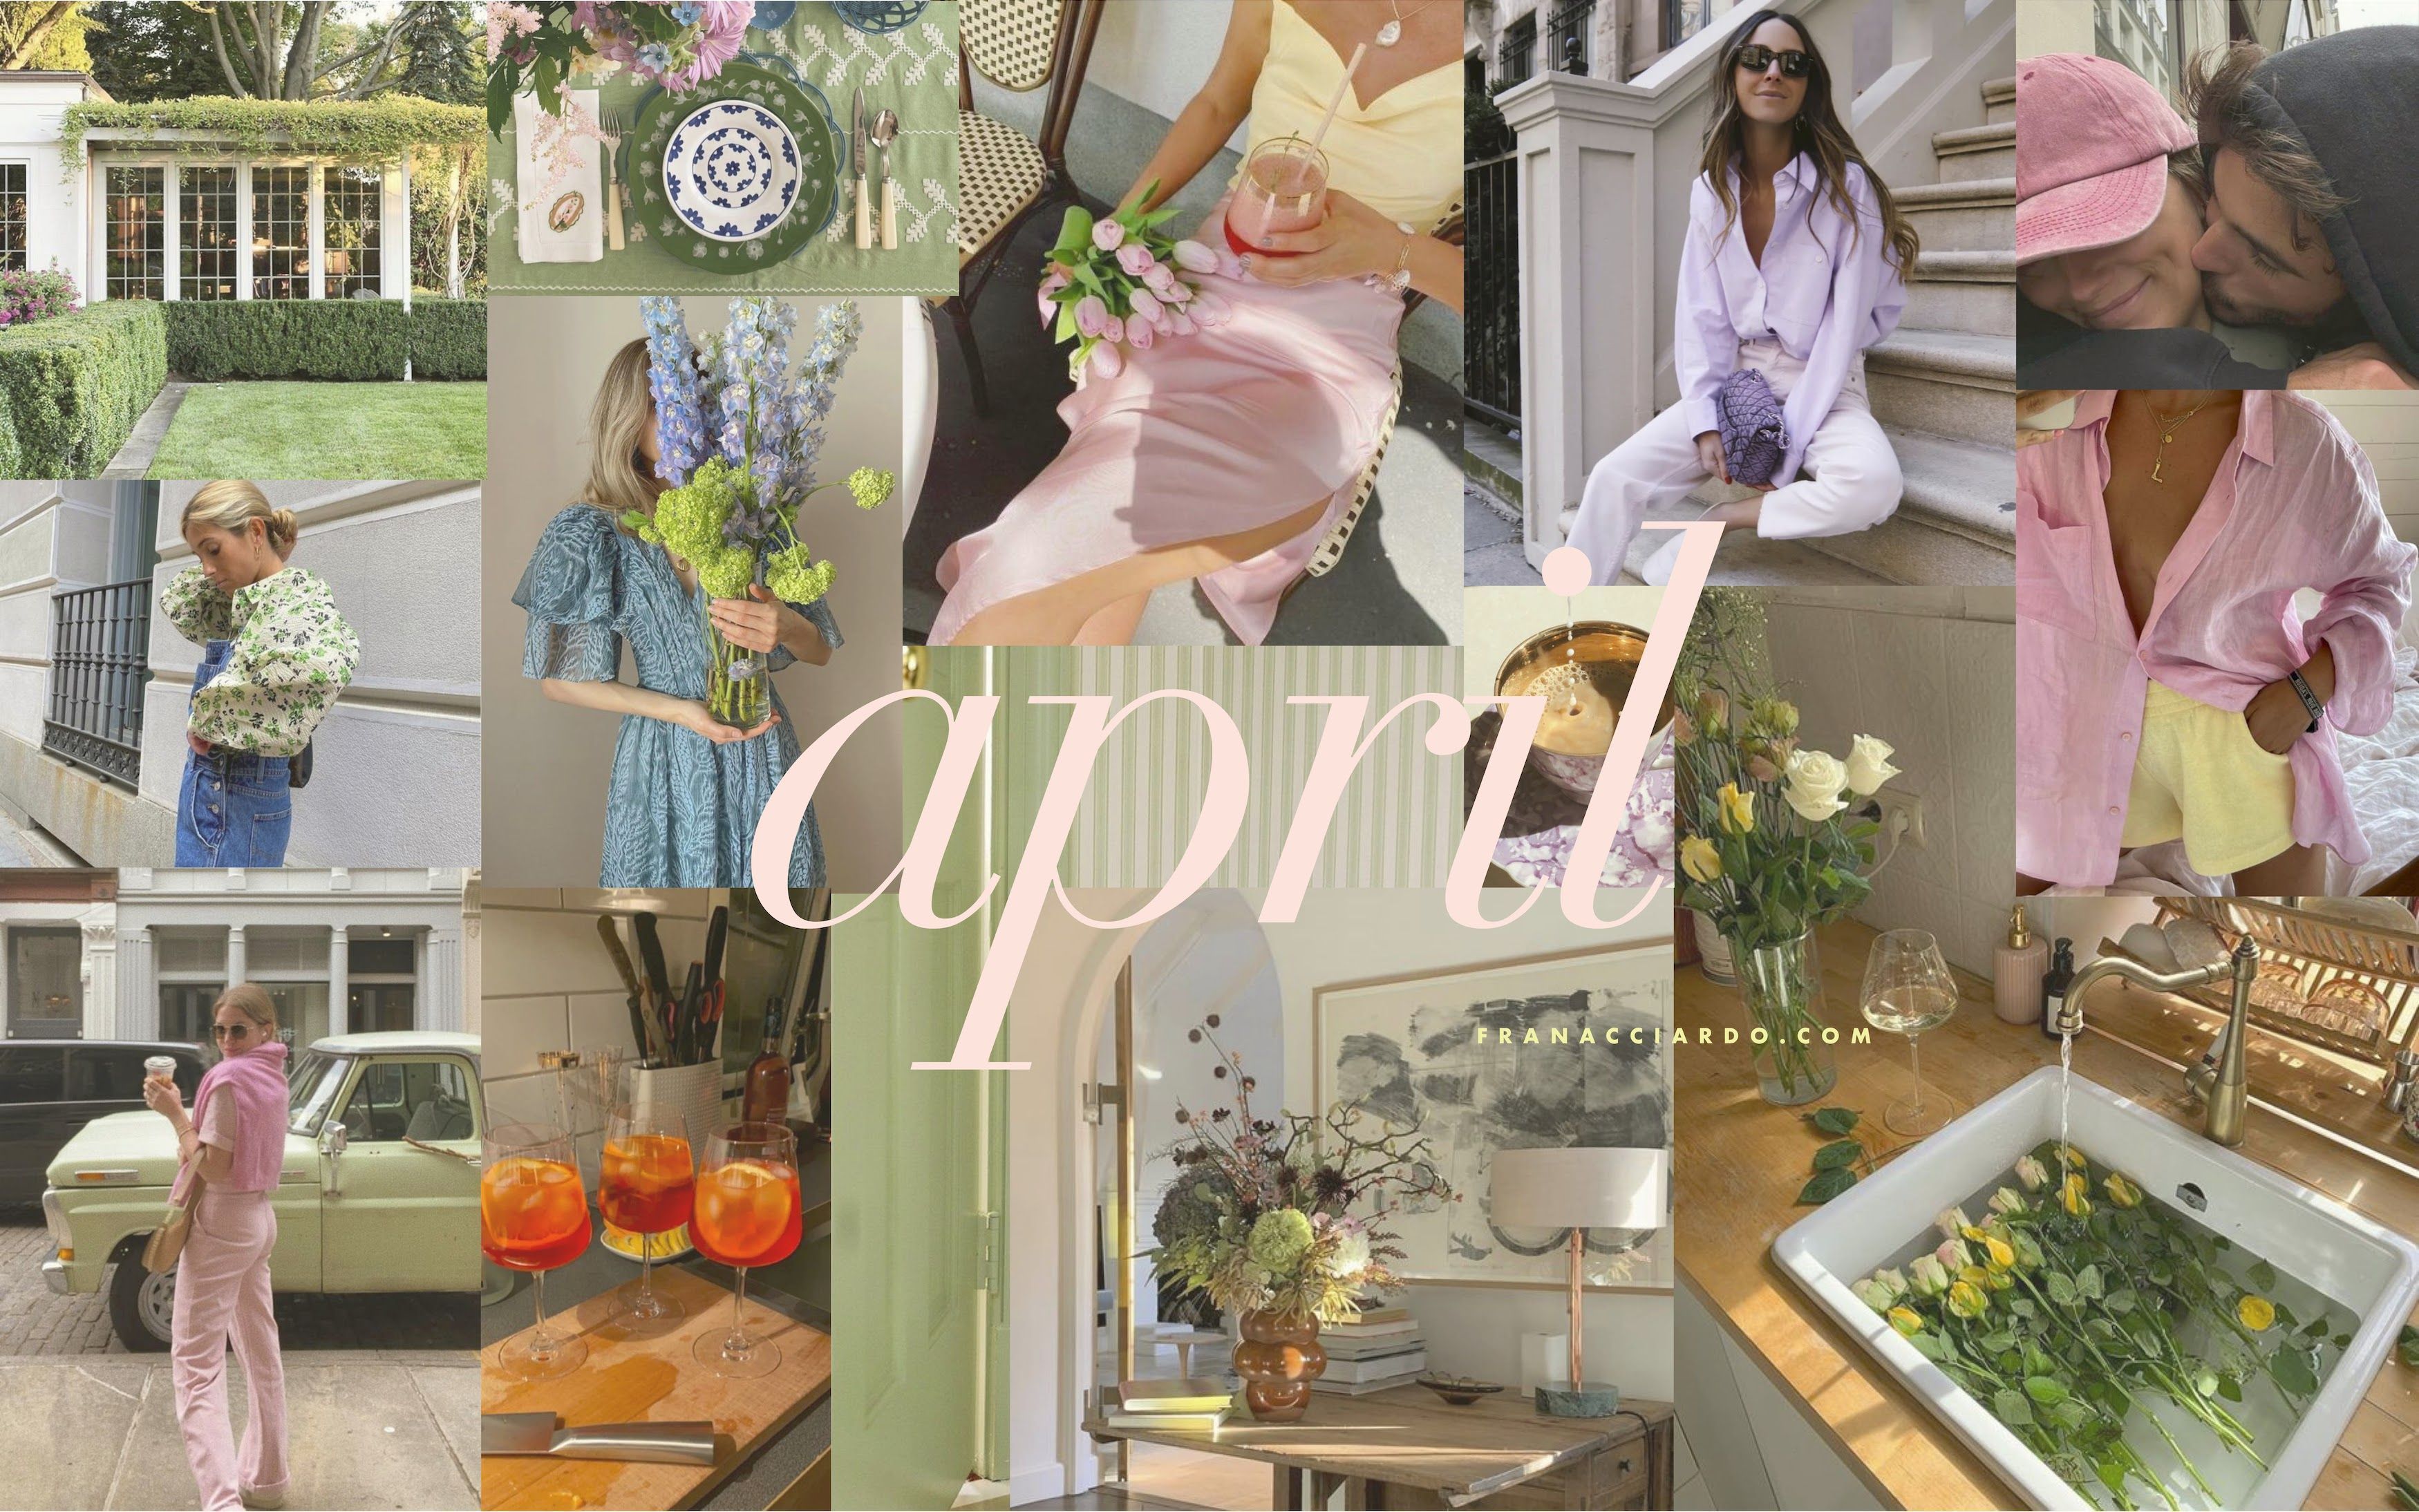 A collage of images from April 2021, including images of flowers, people, and interiors. - April, Easter